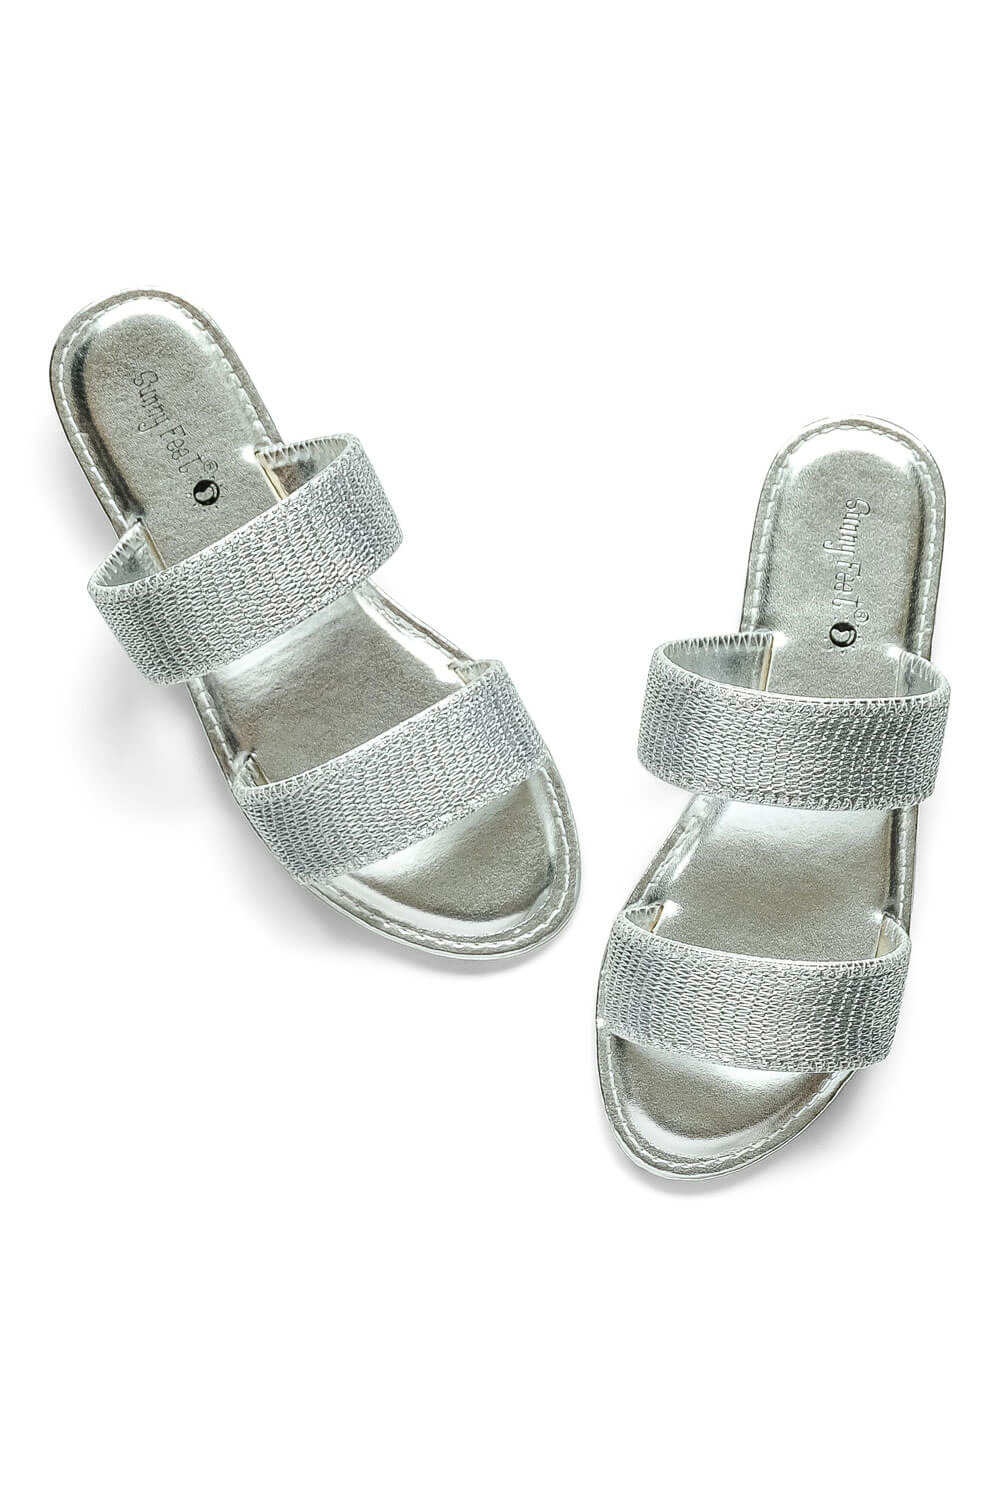 Young girls ivory sparkly summer sandals - Buy Online